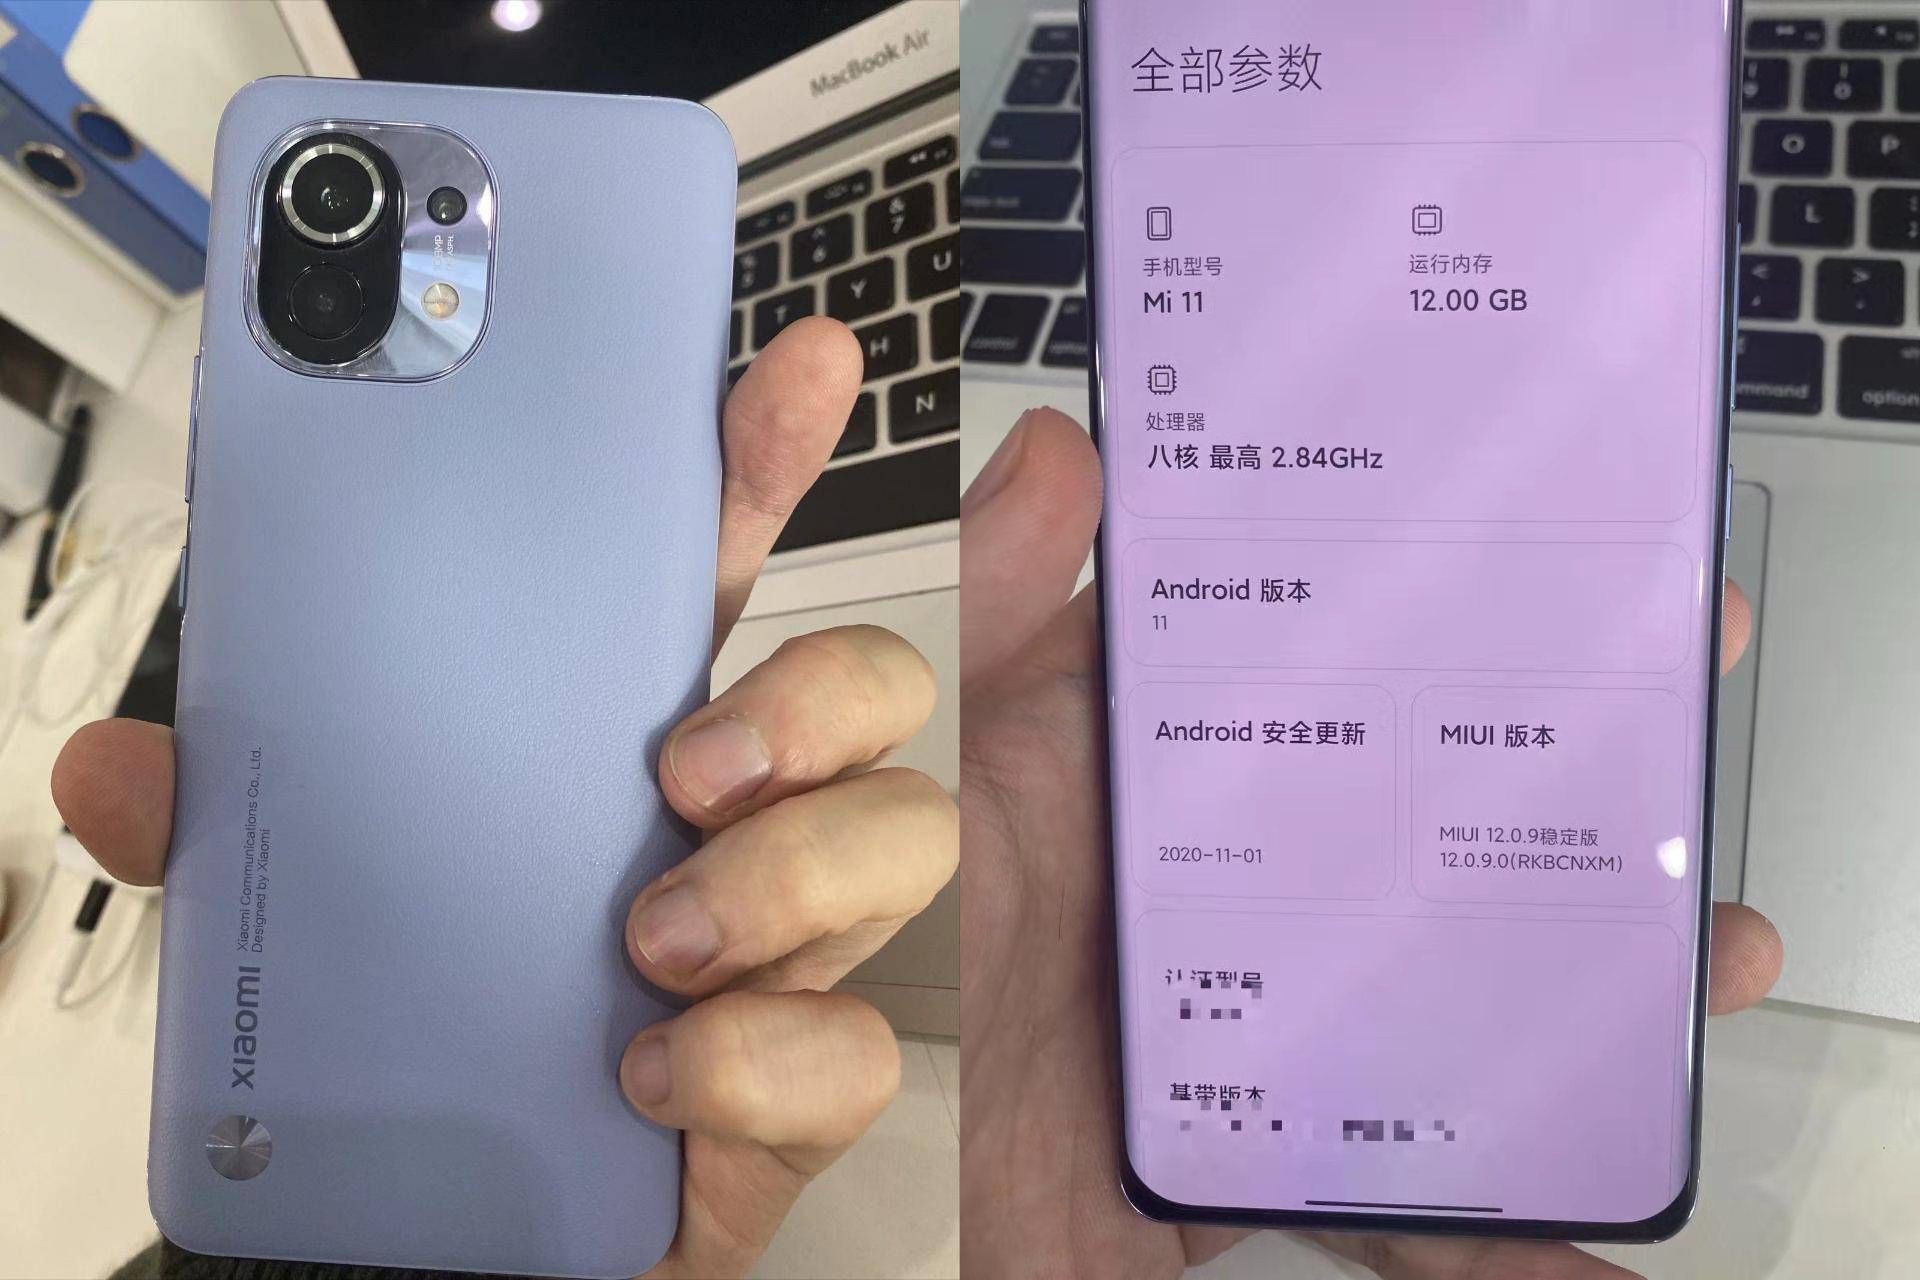 Xiaomi Mi 11 real images appear to reveal design and key specs